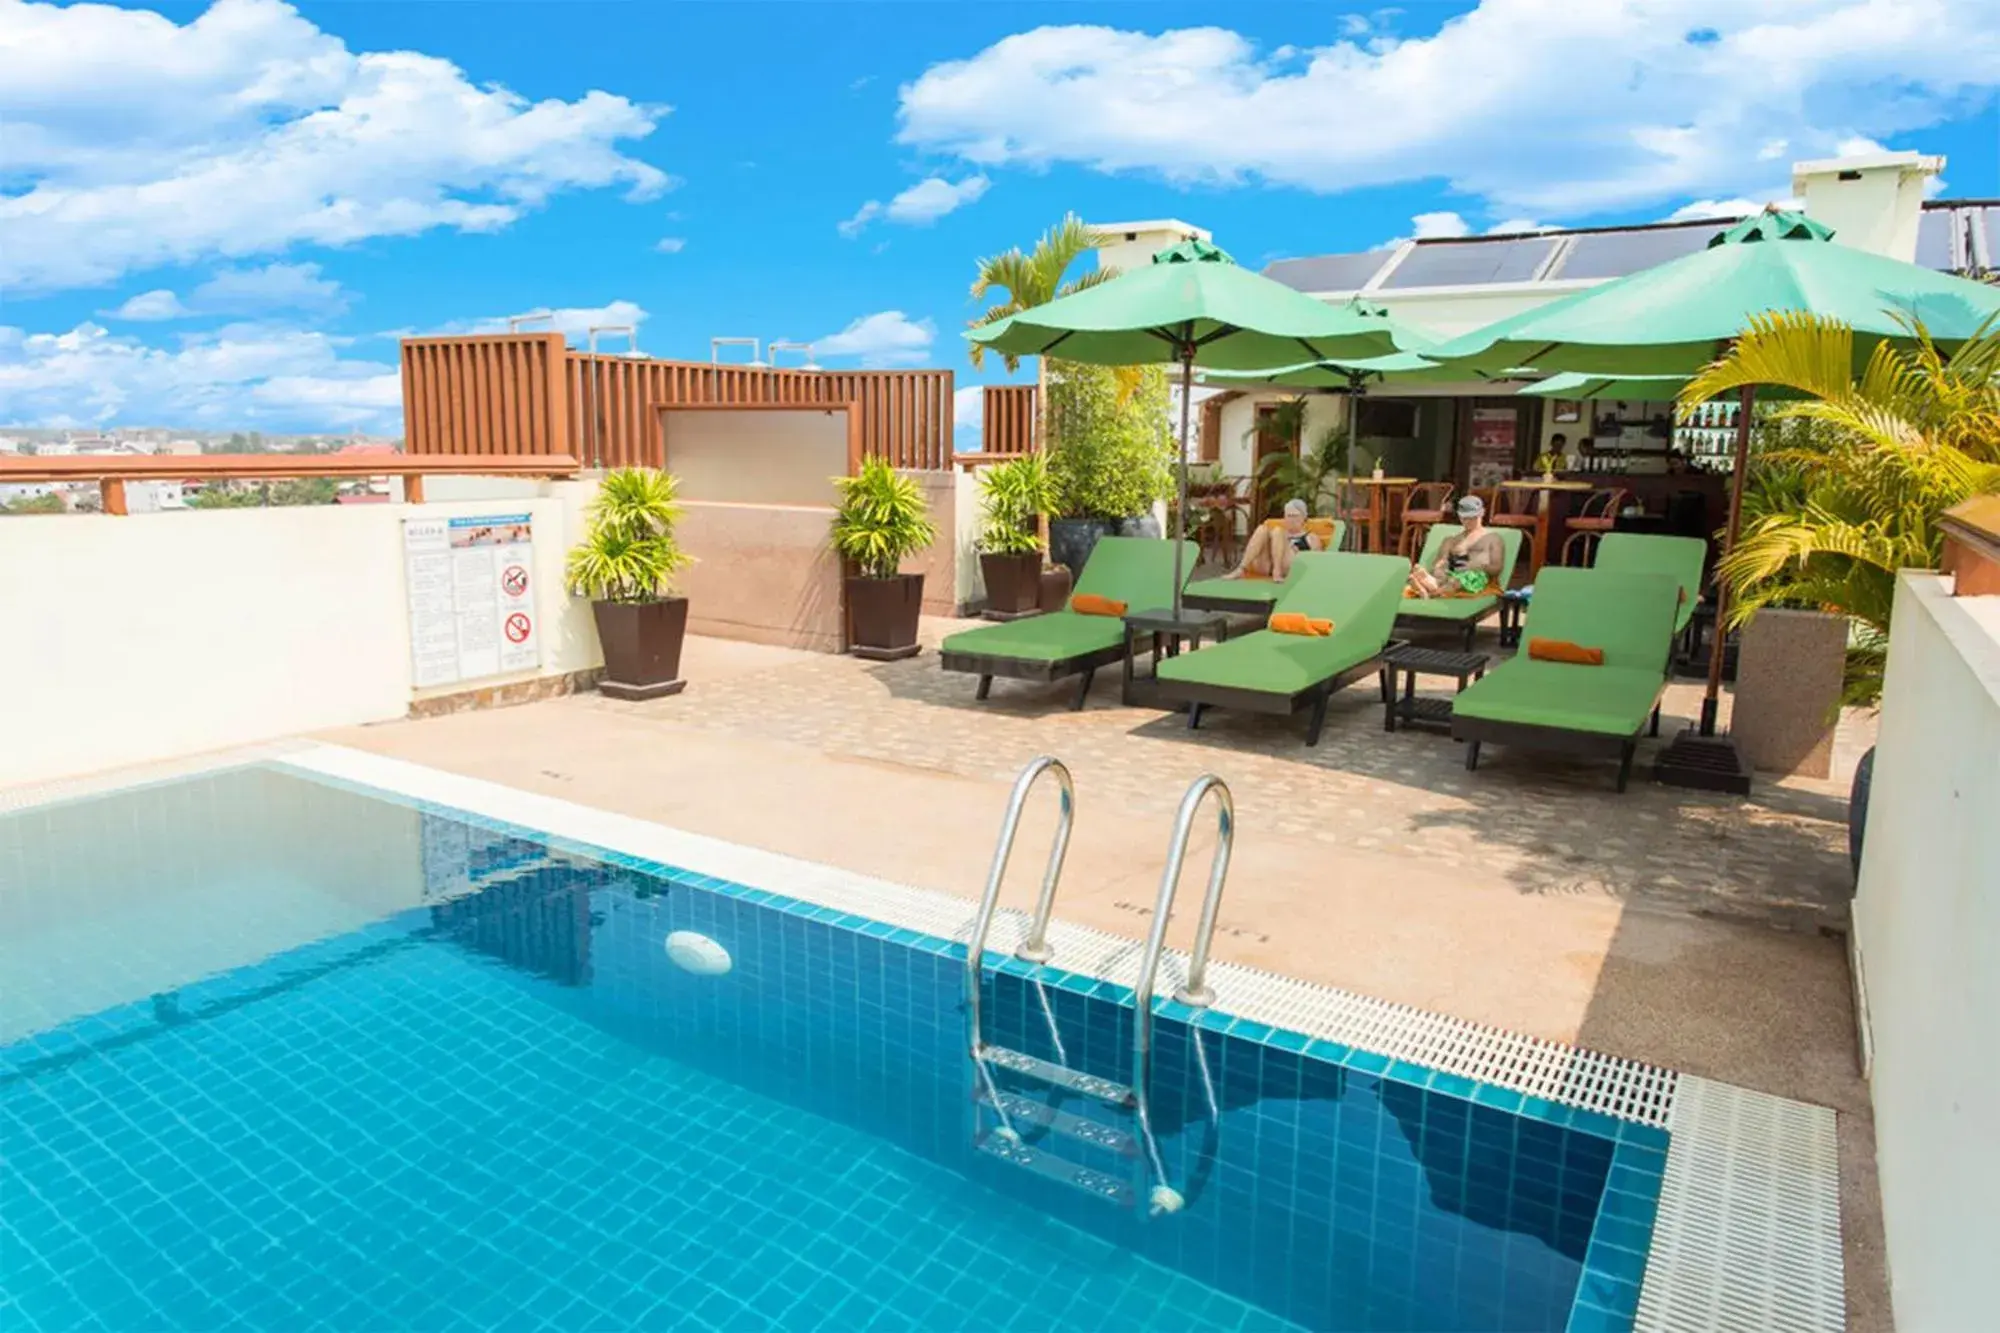 Swimming Pool in Cheathata CTS Hotel Siem Reap